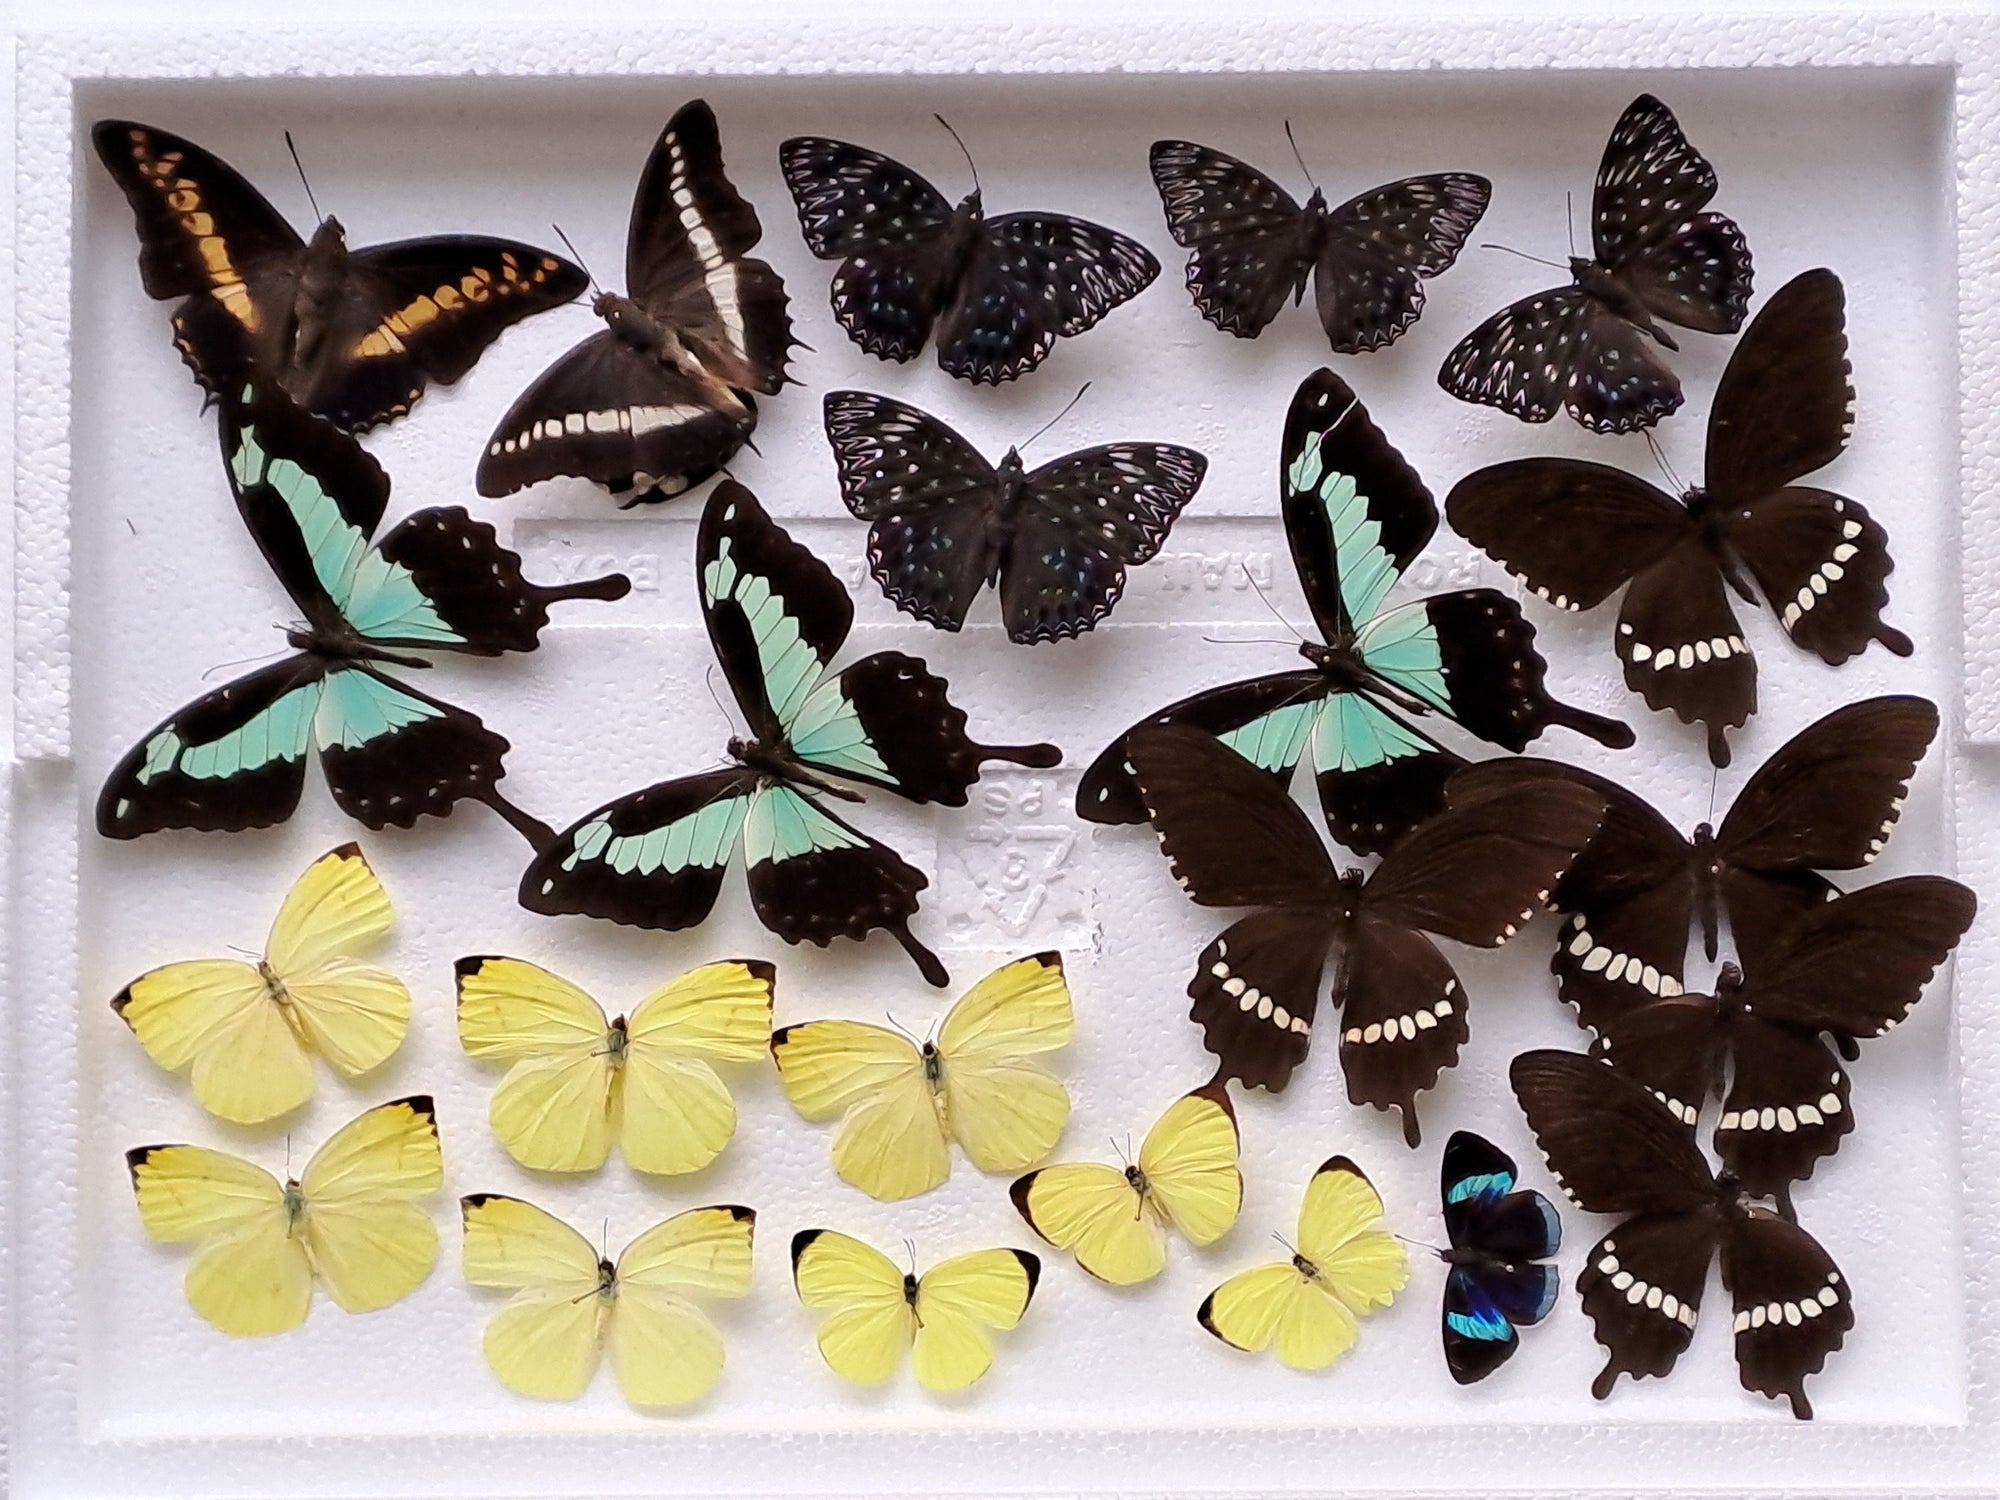 DAMAGED BUTTERFLIES as seen in photo. Broken specimens good for art and craft projects (BOX No. 26)